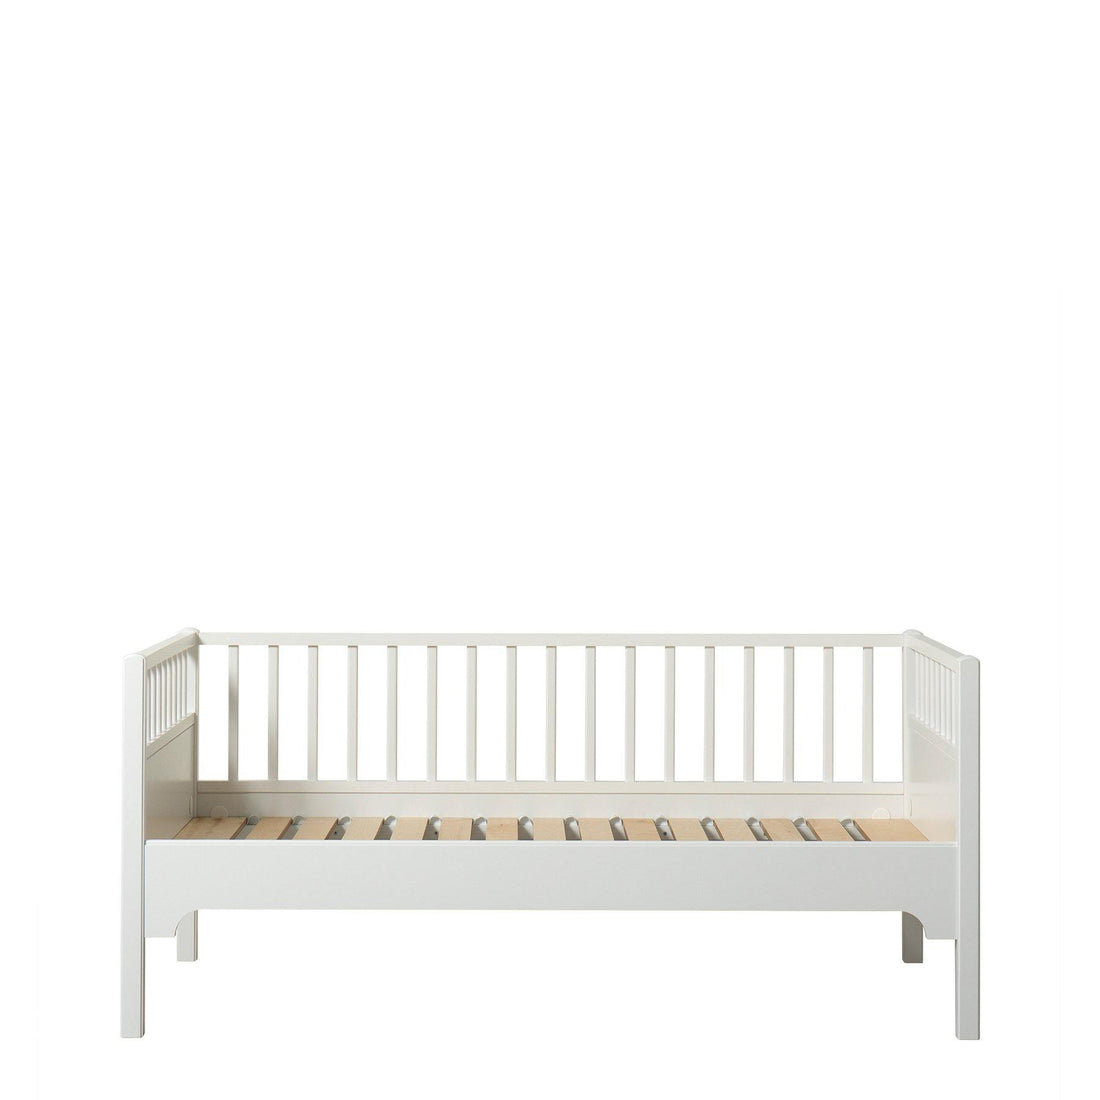 oliver-furniture-seaside-classic-junior-day-bed- (1)